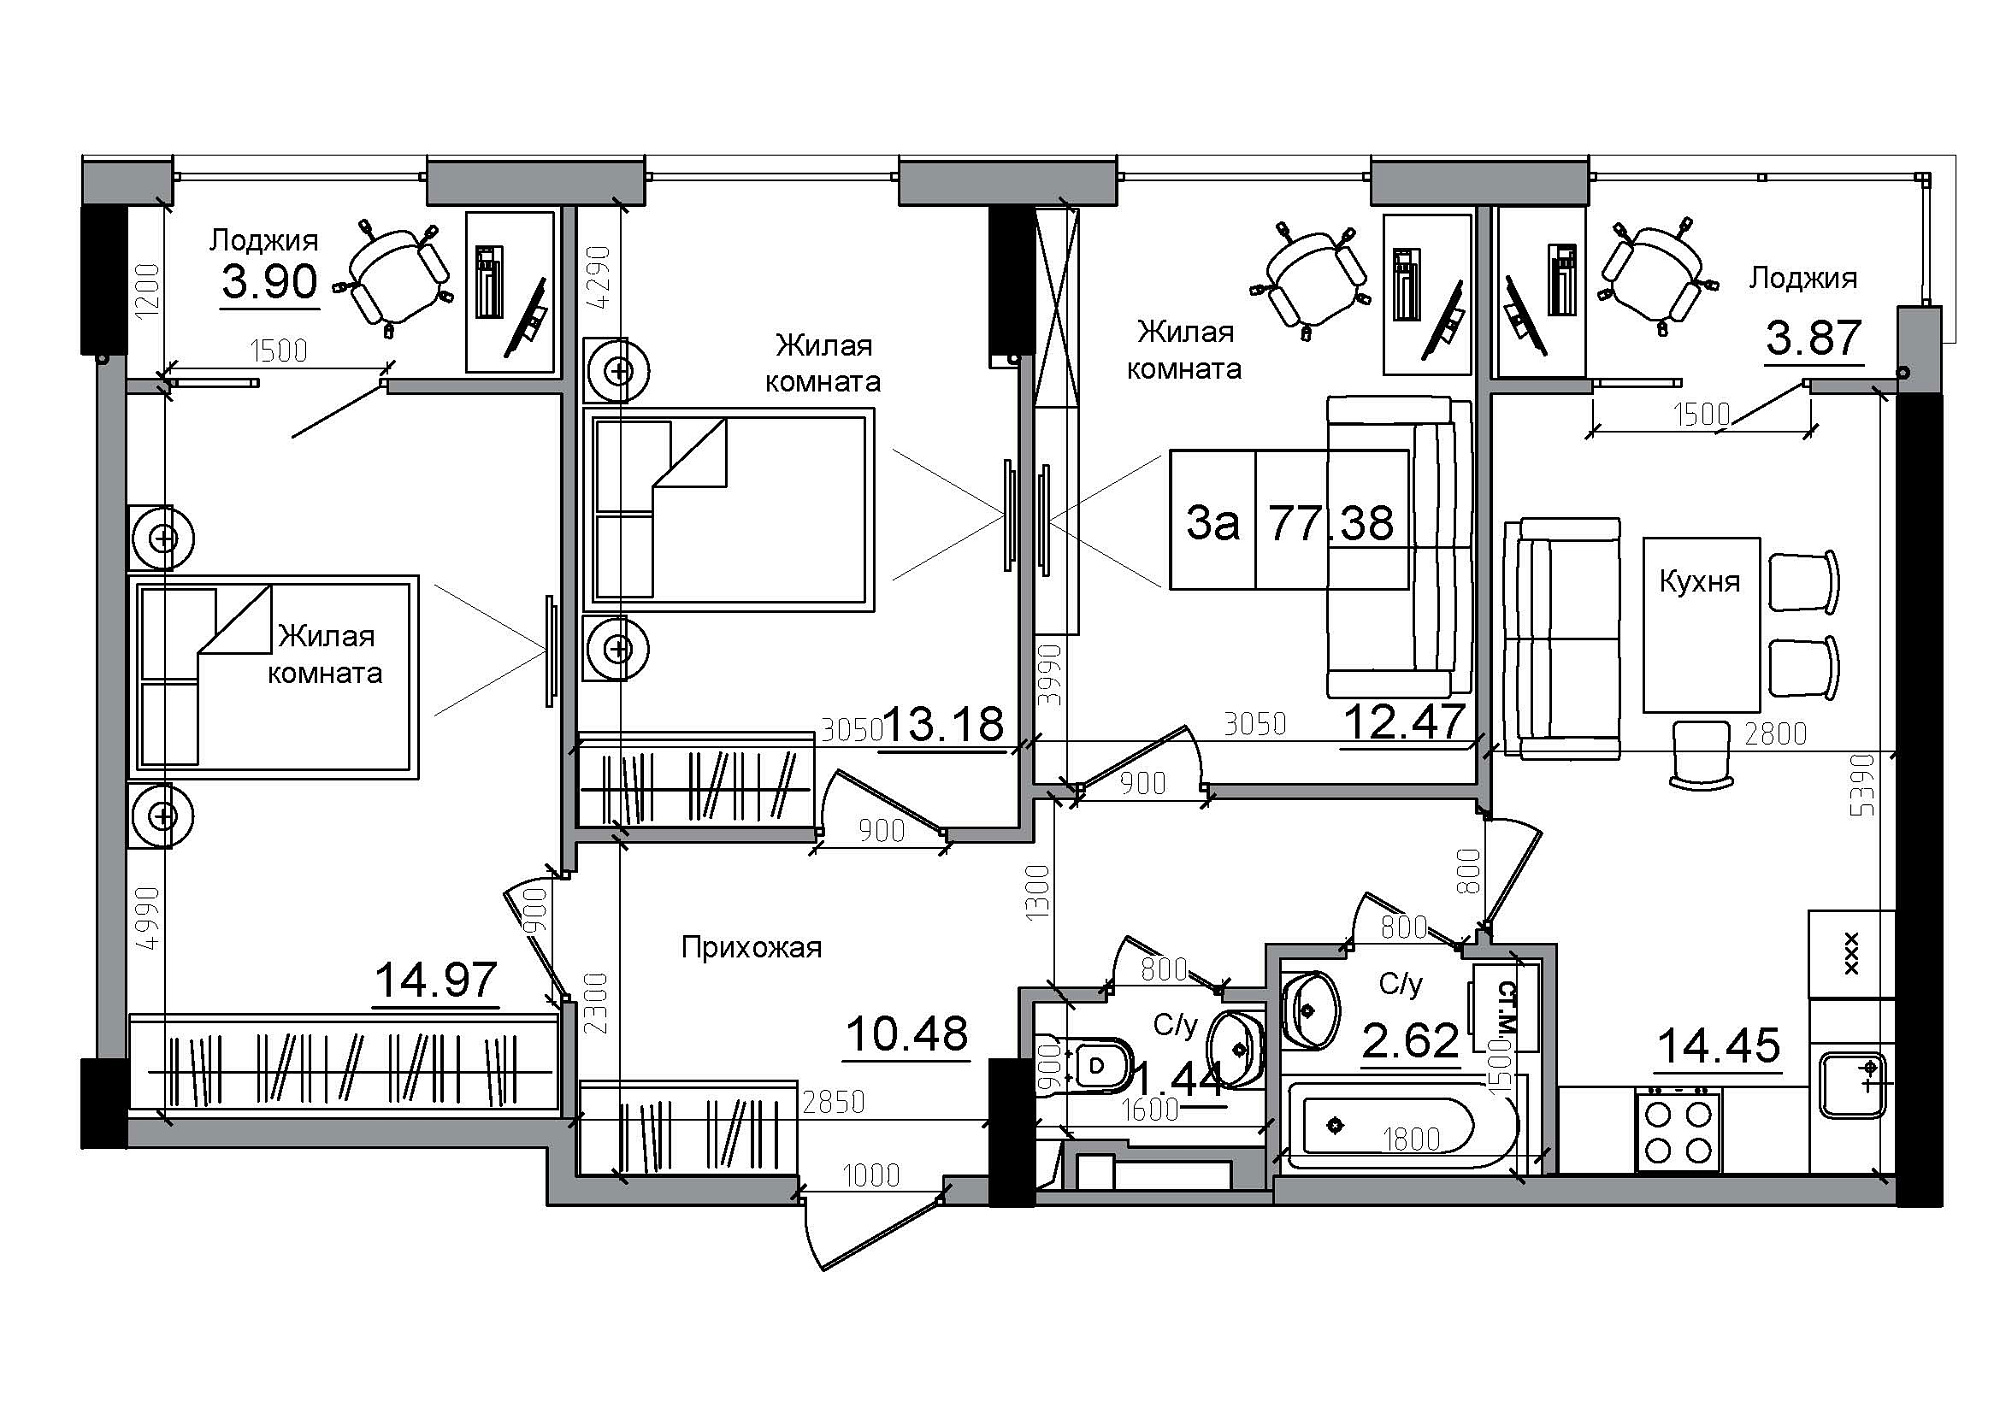 Planning 3-rm flats area 77.38m2, AB-12-06/00010.